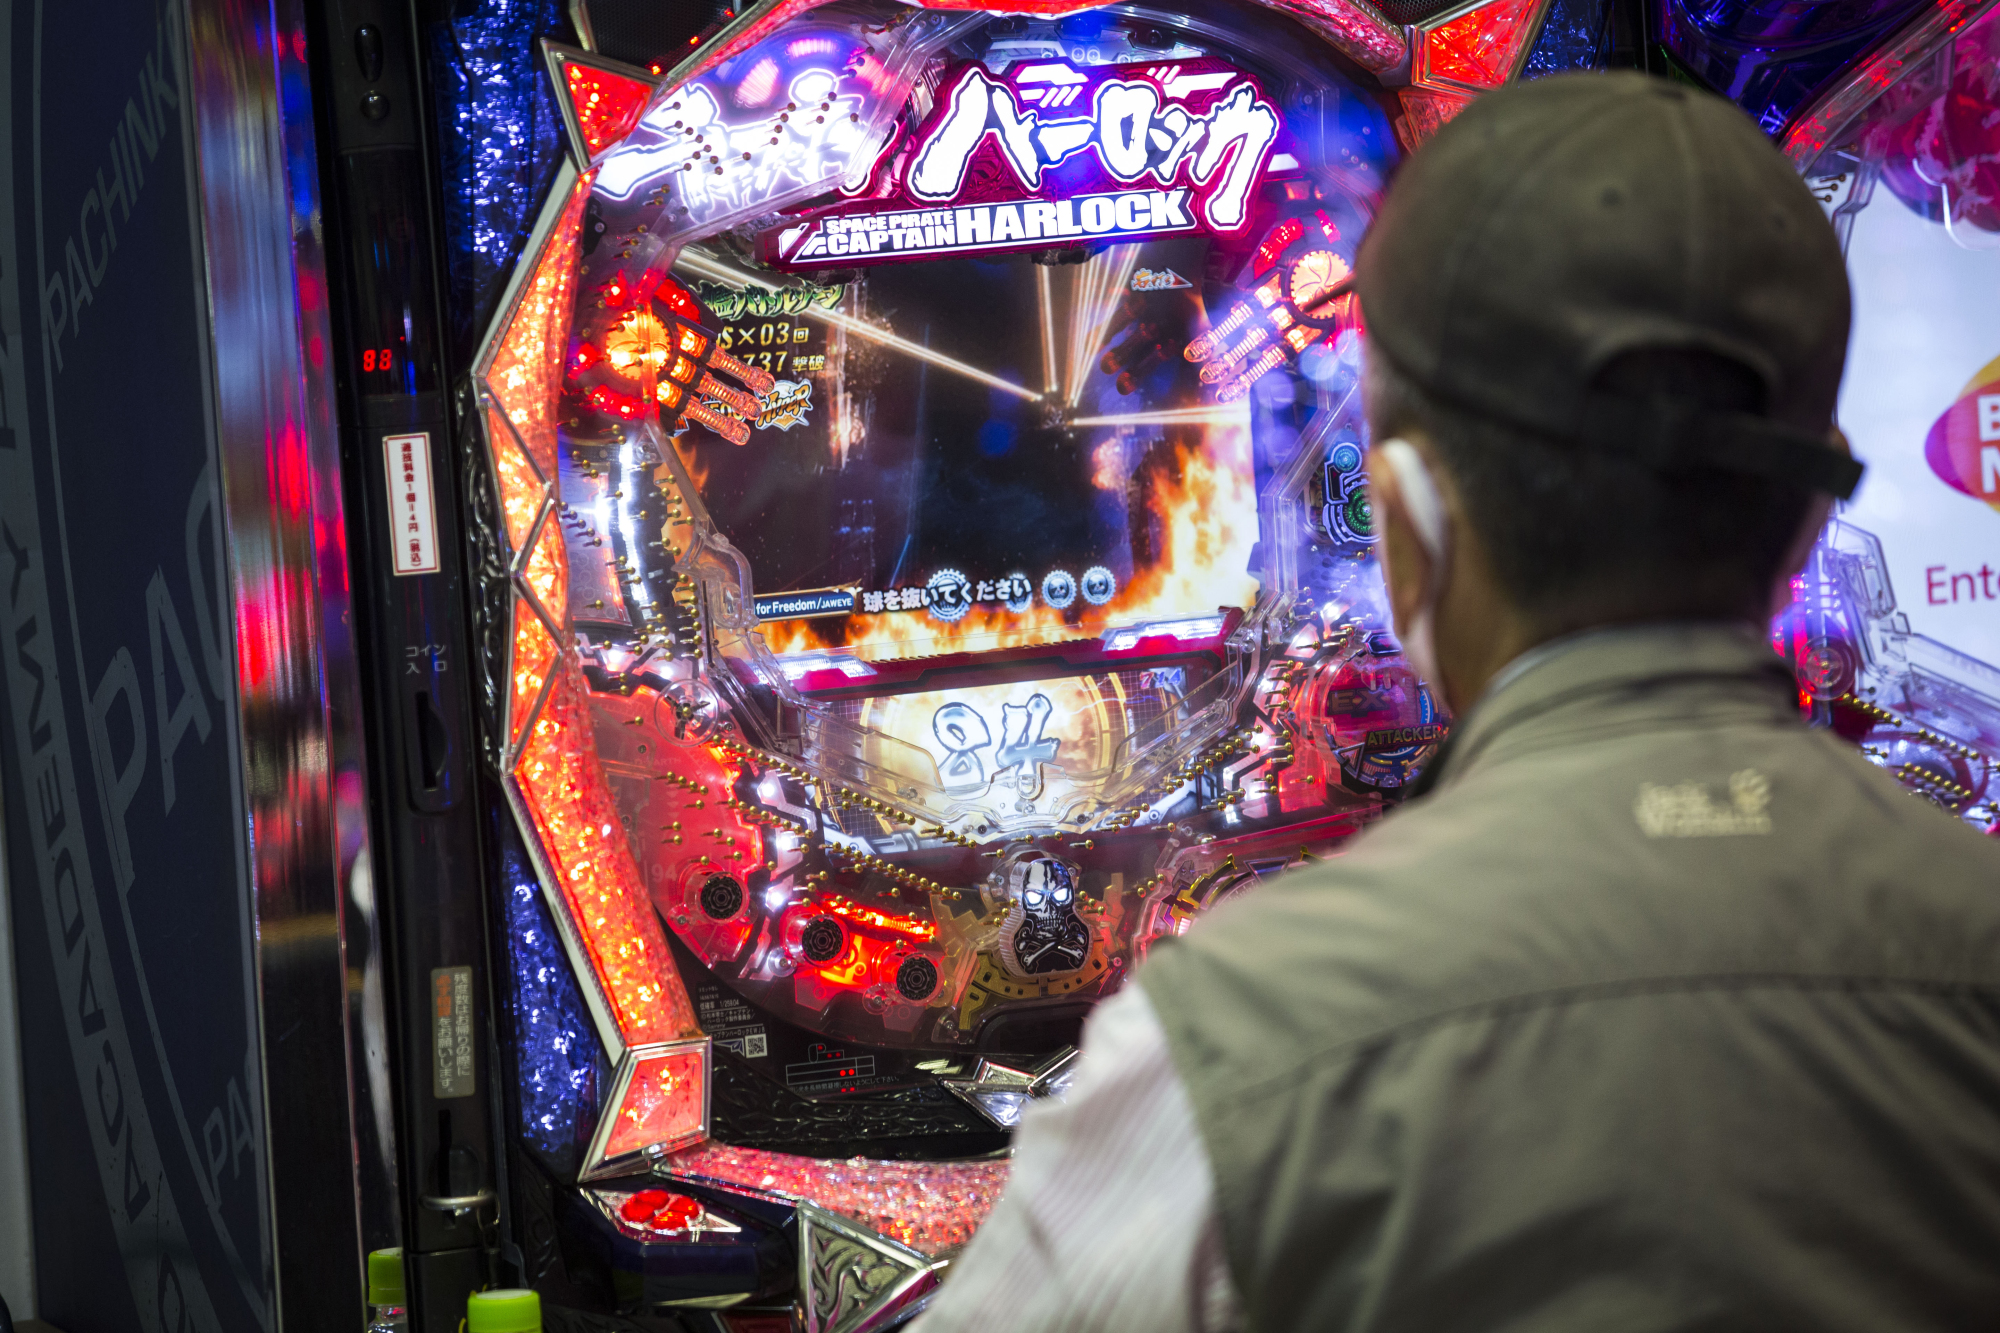 How do Pachinko parlors maintain cleanliness?